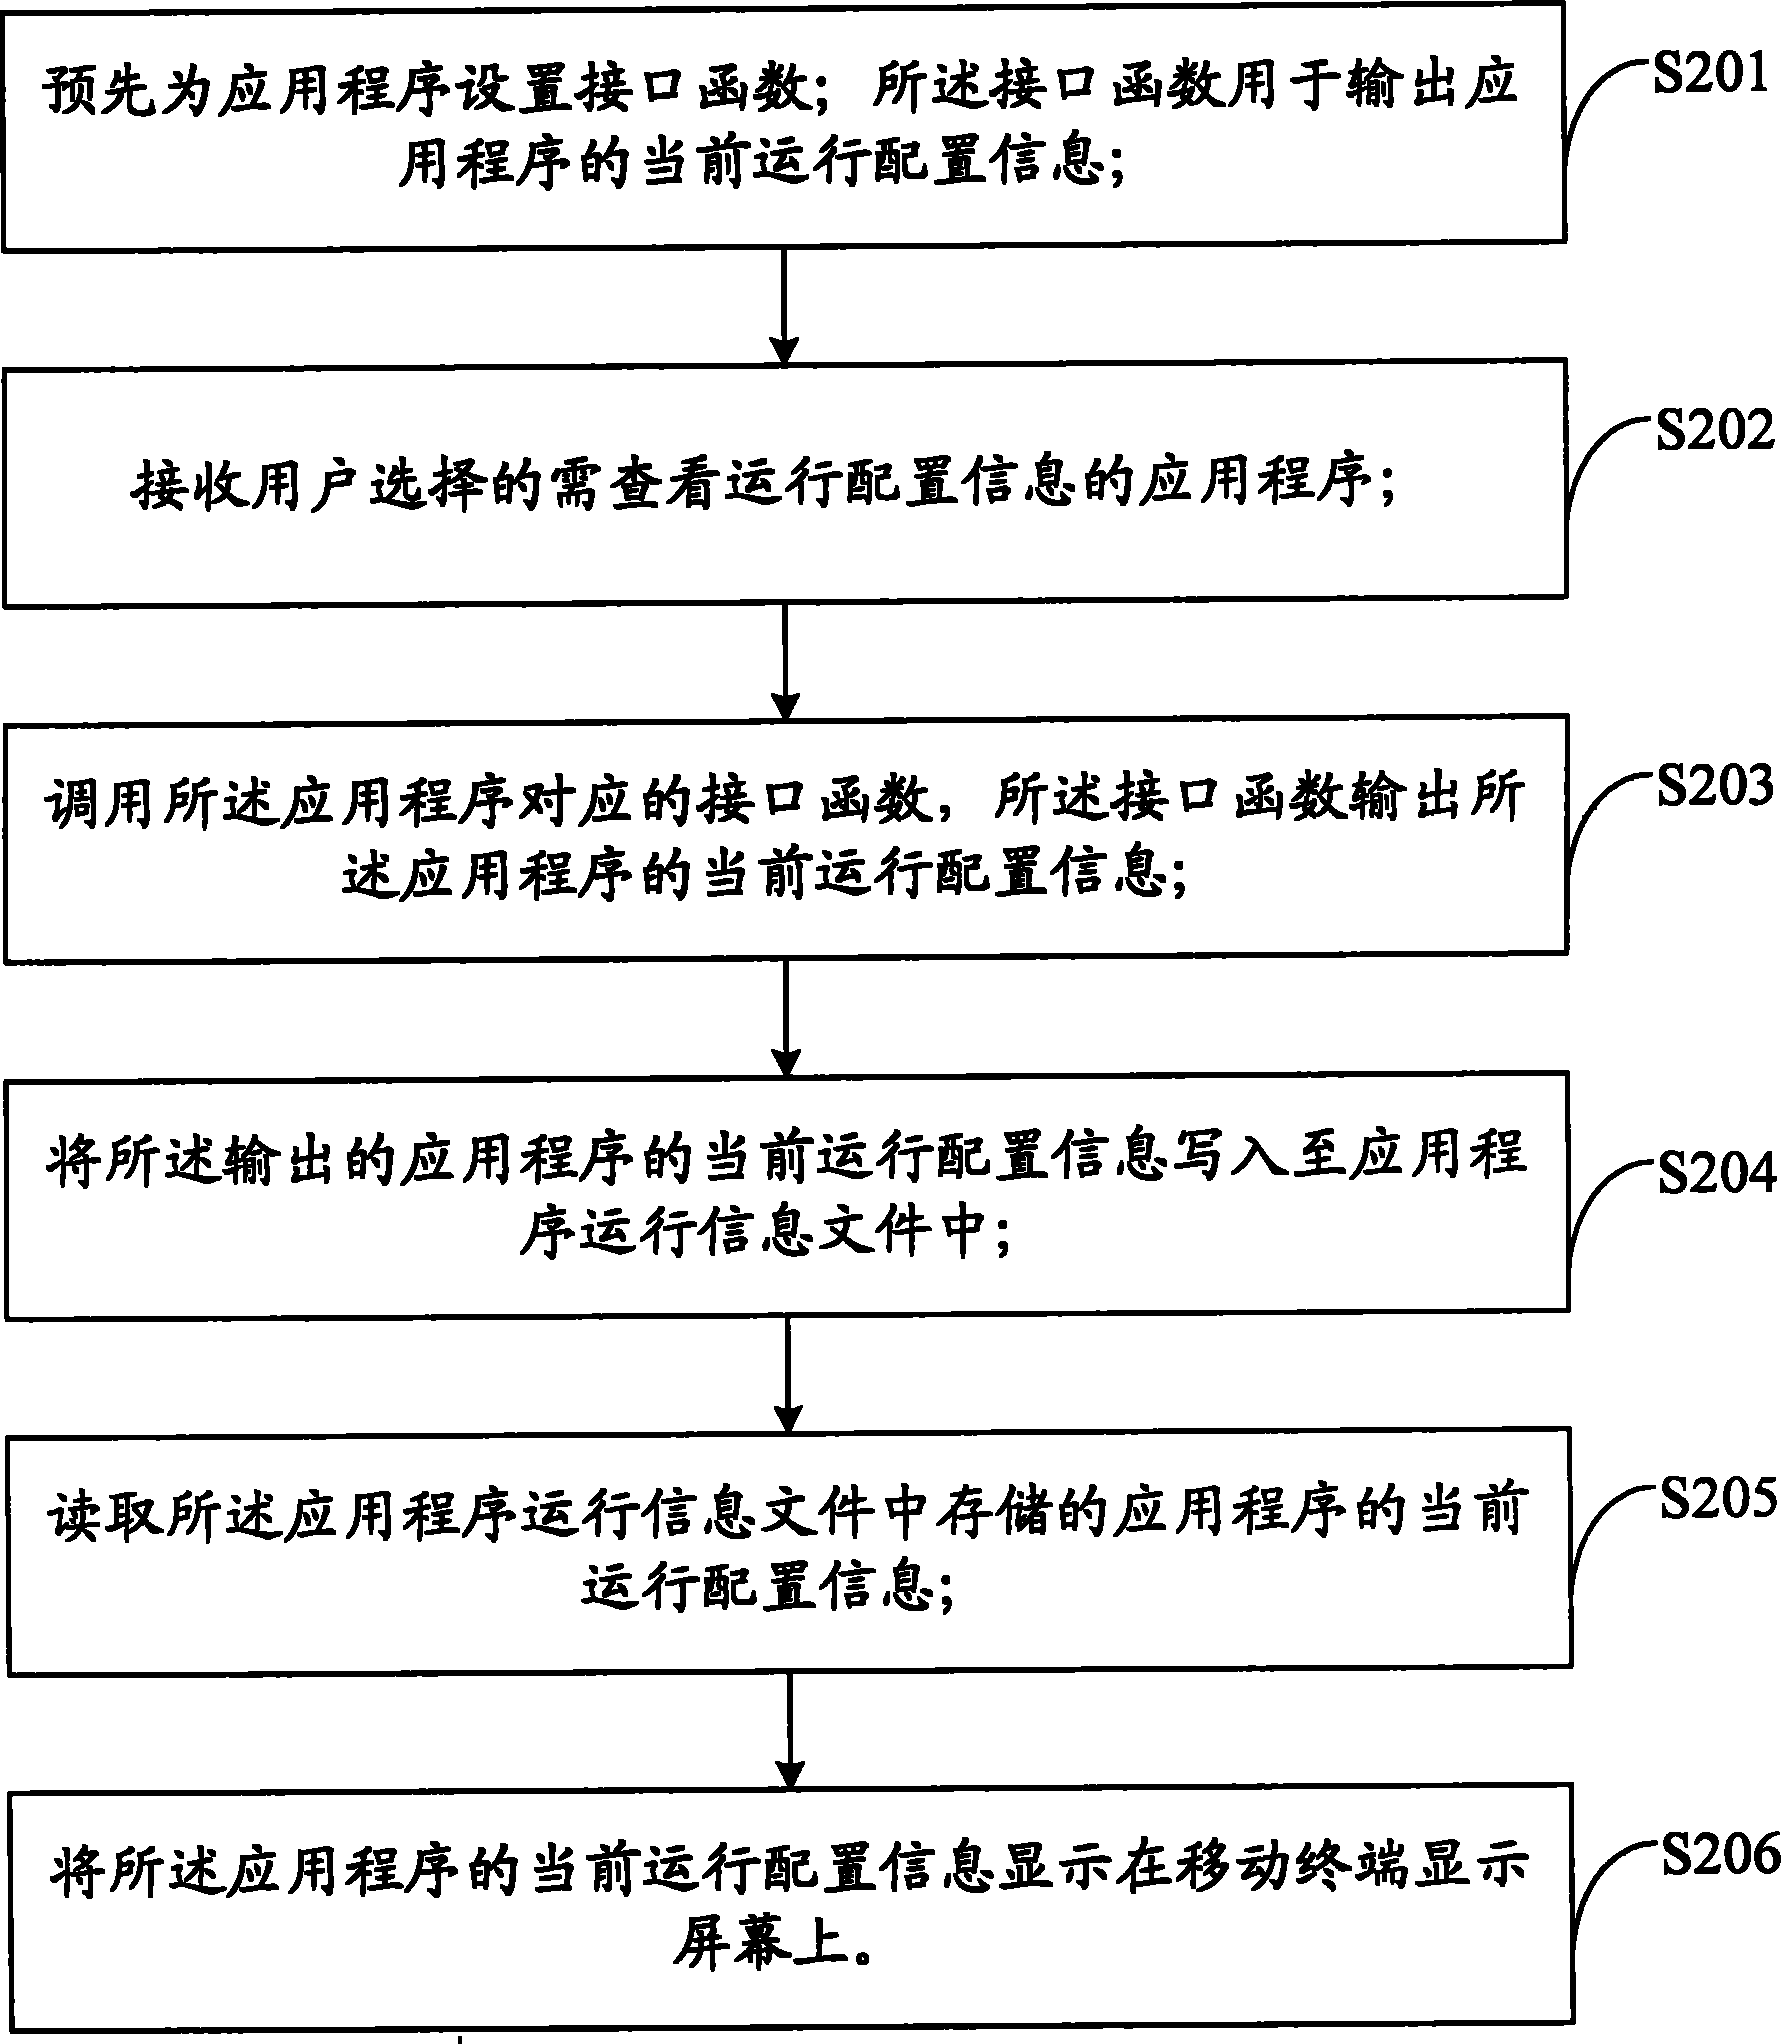 Method and system for customizing applications and displaying application information